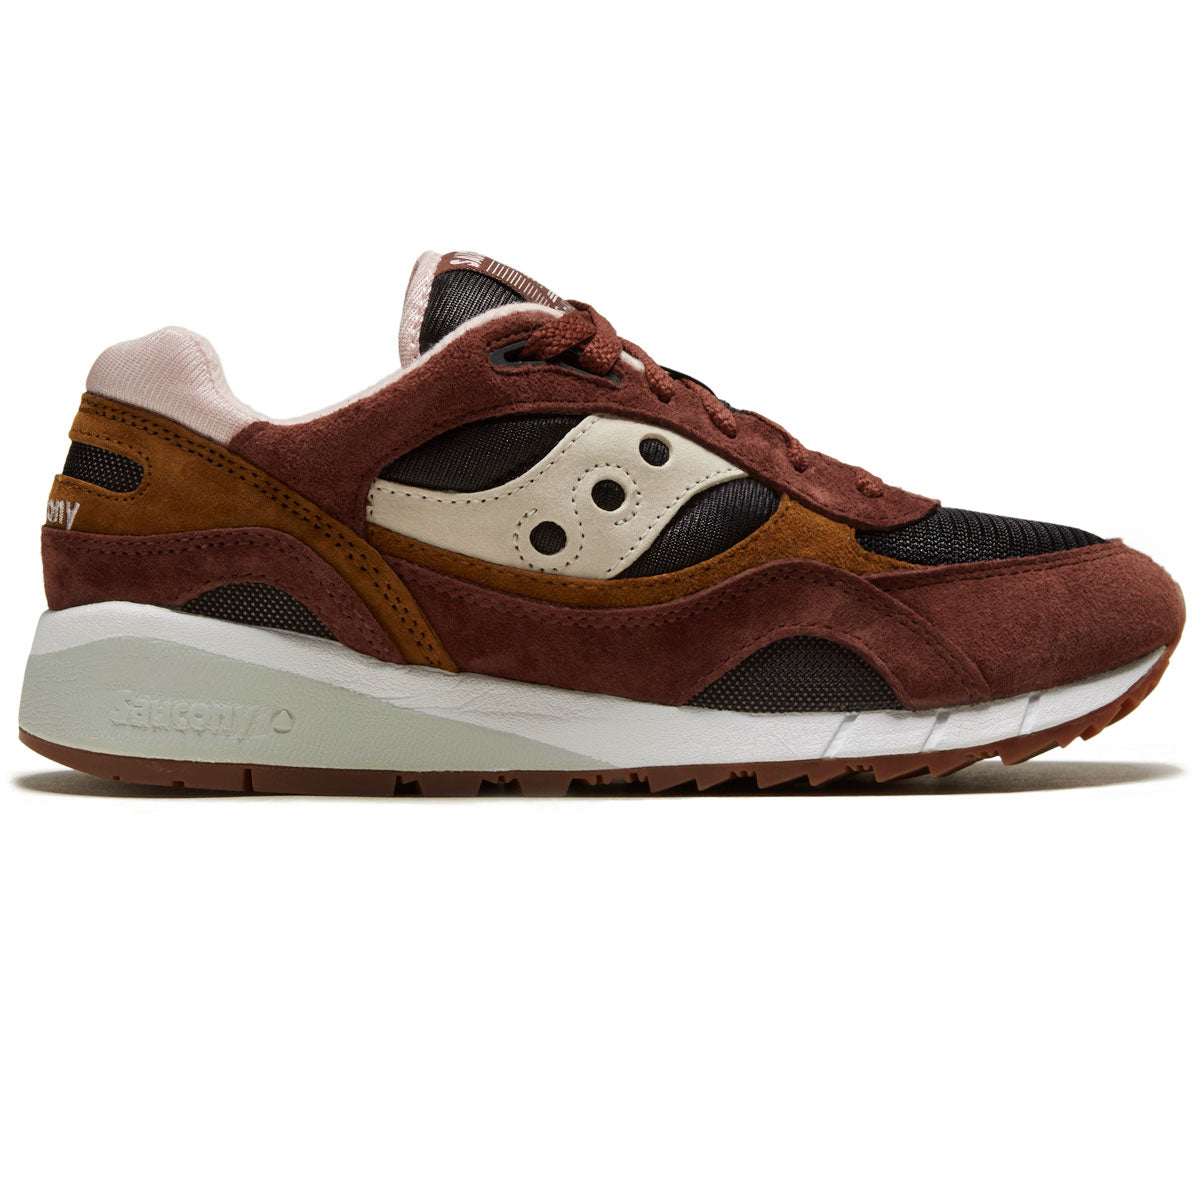 Saucony Shadow 6000 Shoes - Brown/Black image 1